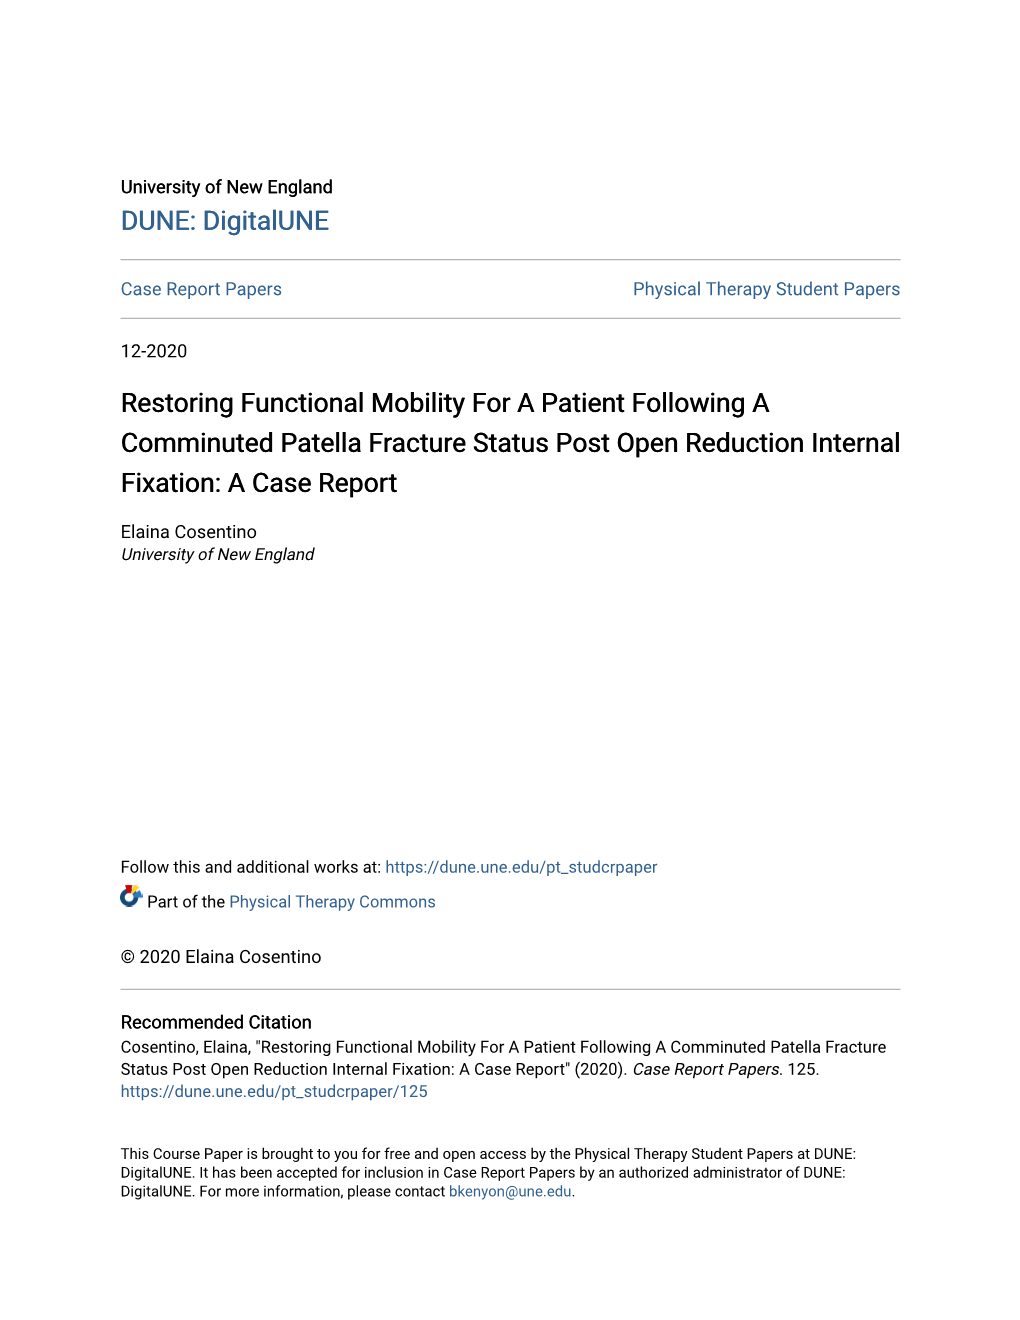 Restoring Functional Mobility for a Patient Following a Comminuted Patella Fracture Status Post Open Reduction Internal Fixation: a Case Report